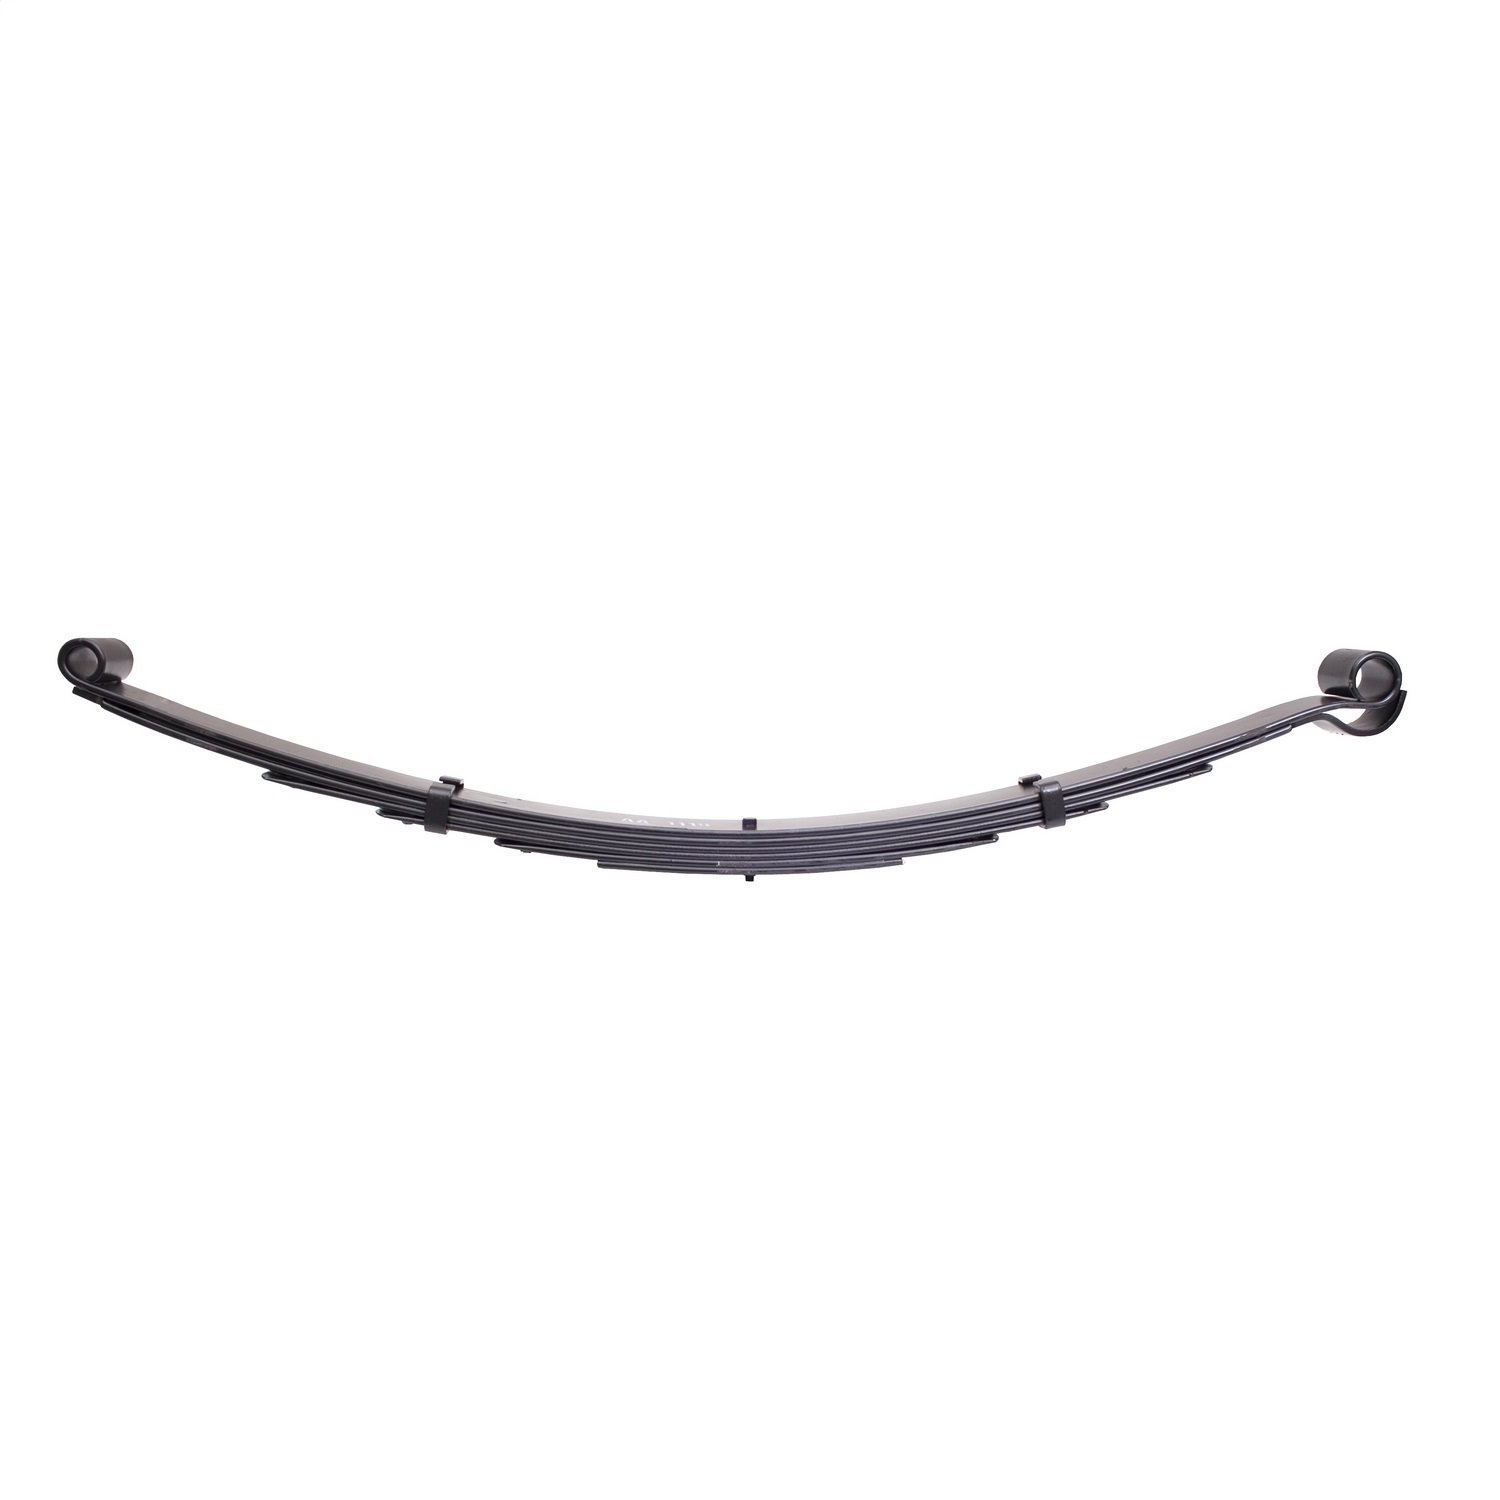 6 leaf replacement rear leaf spring from Omix-ADA, Fits 76-86 Jeep CJs.